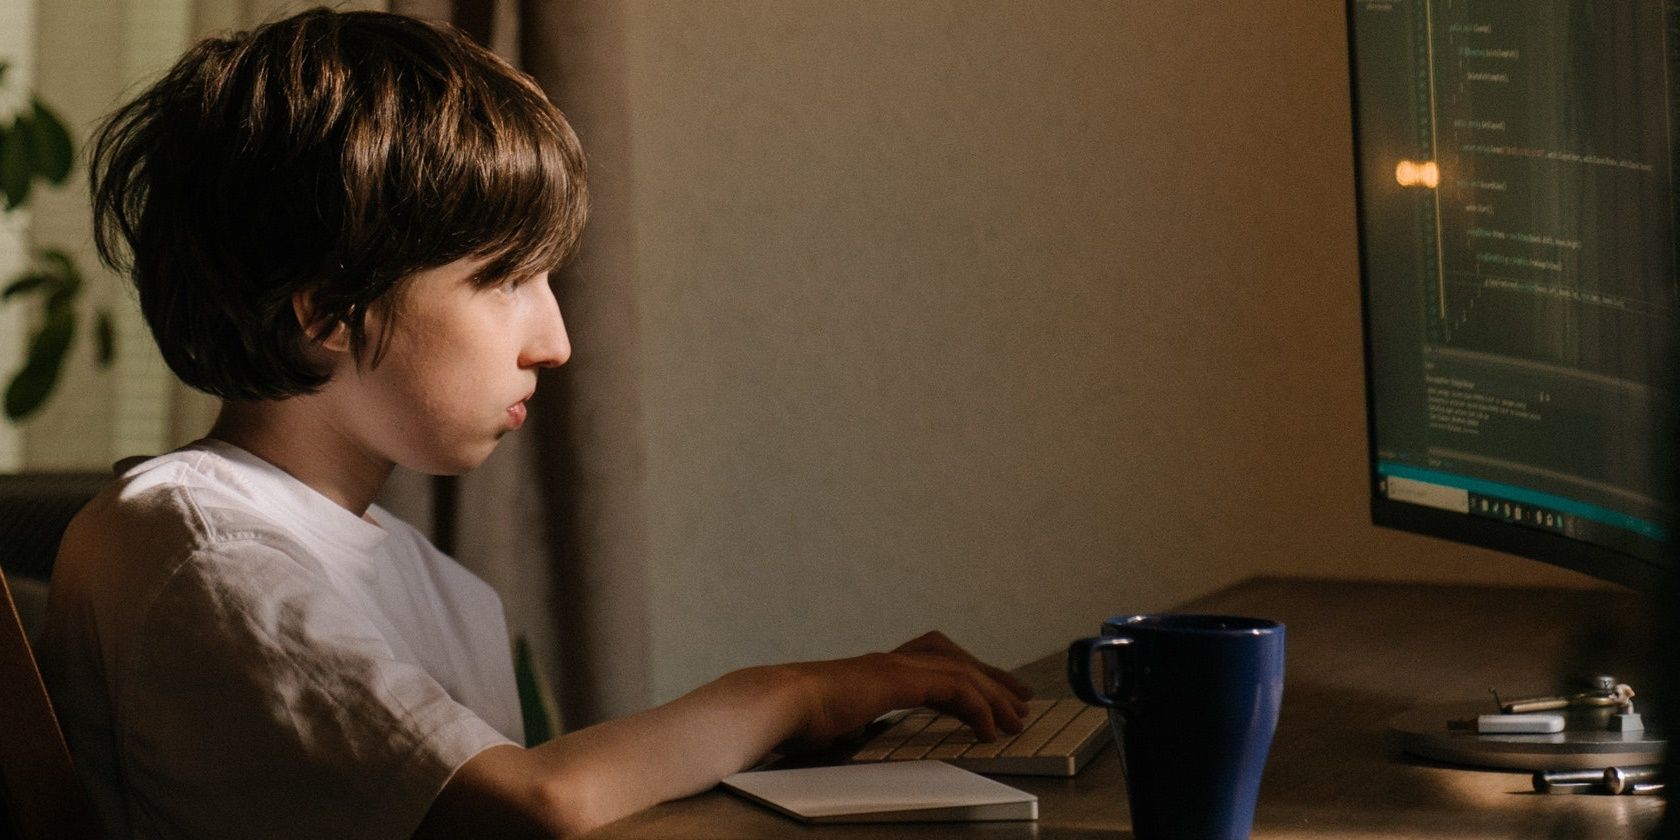 Boy sitting at a desk in front of computer